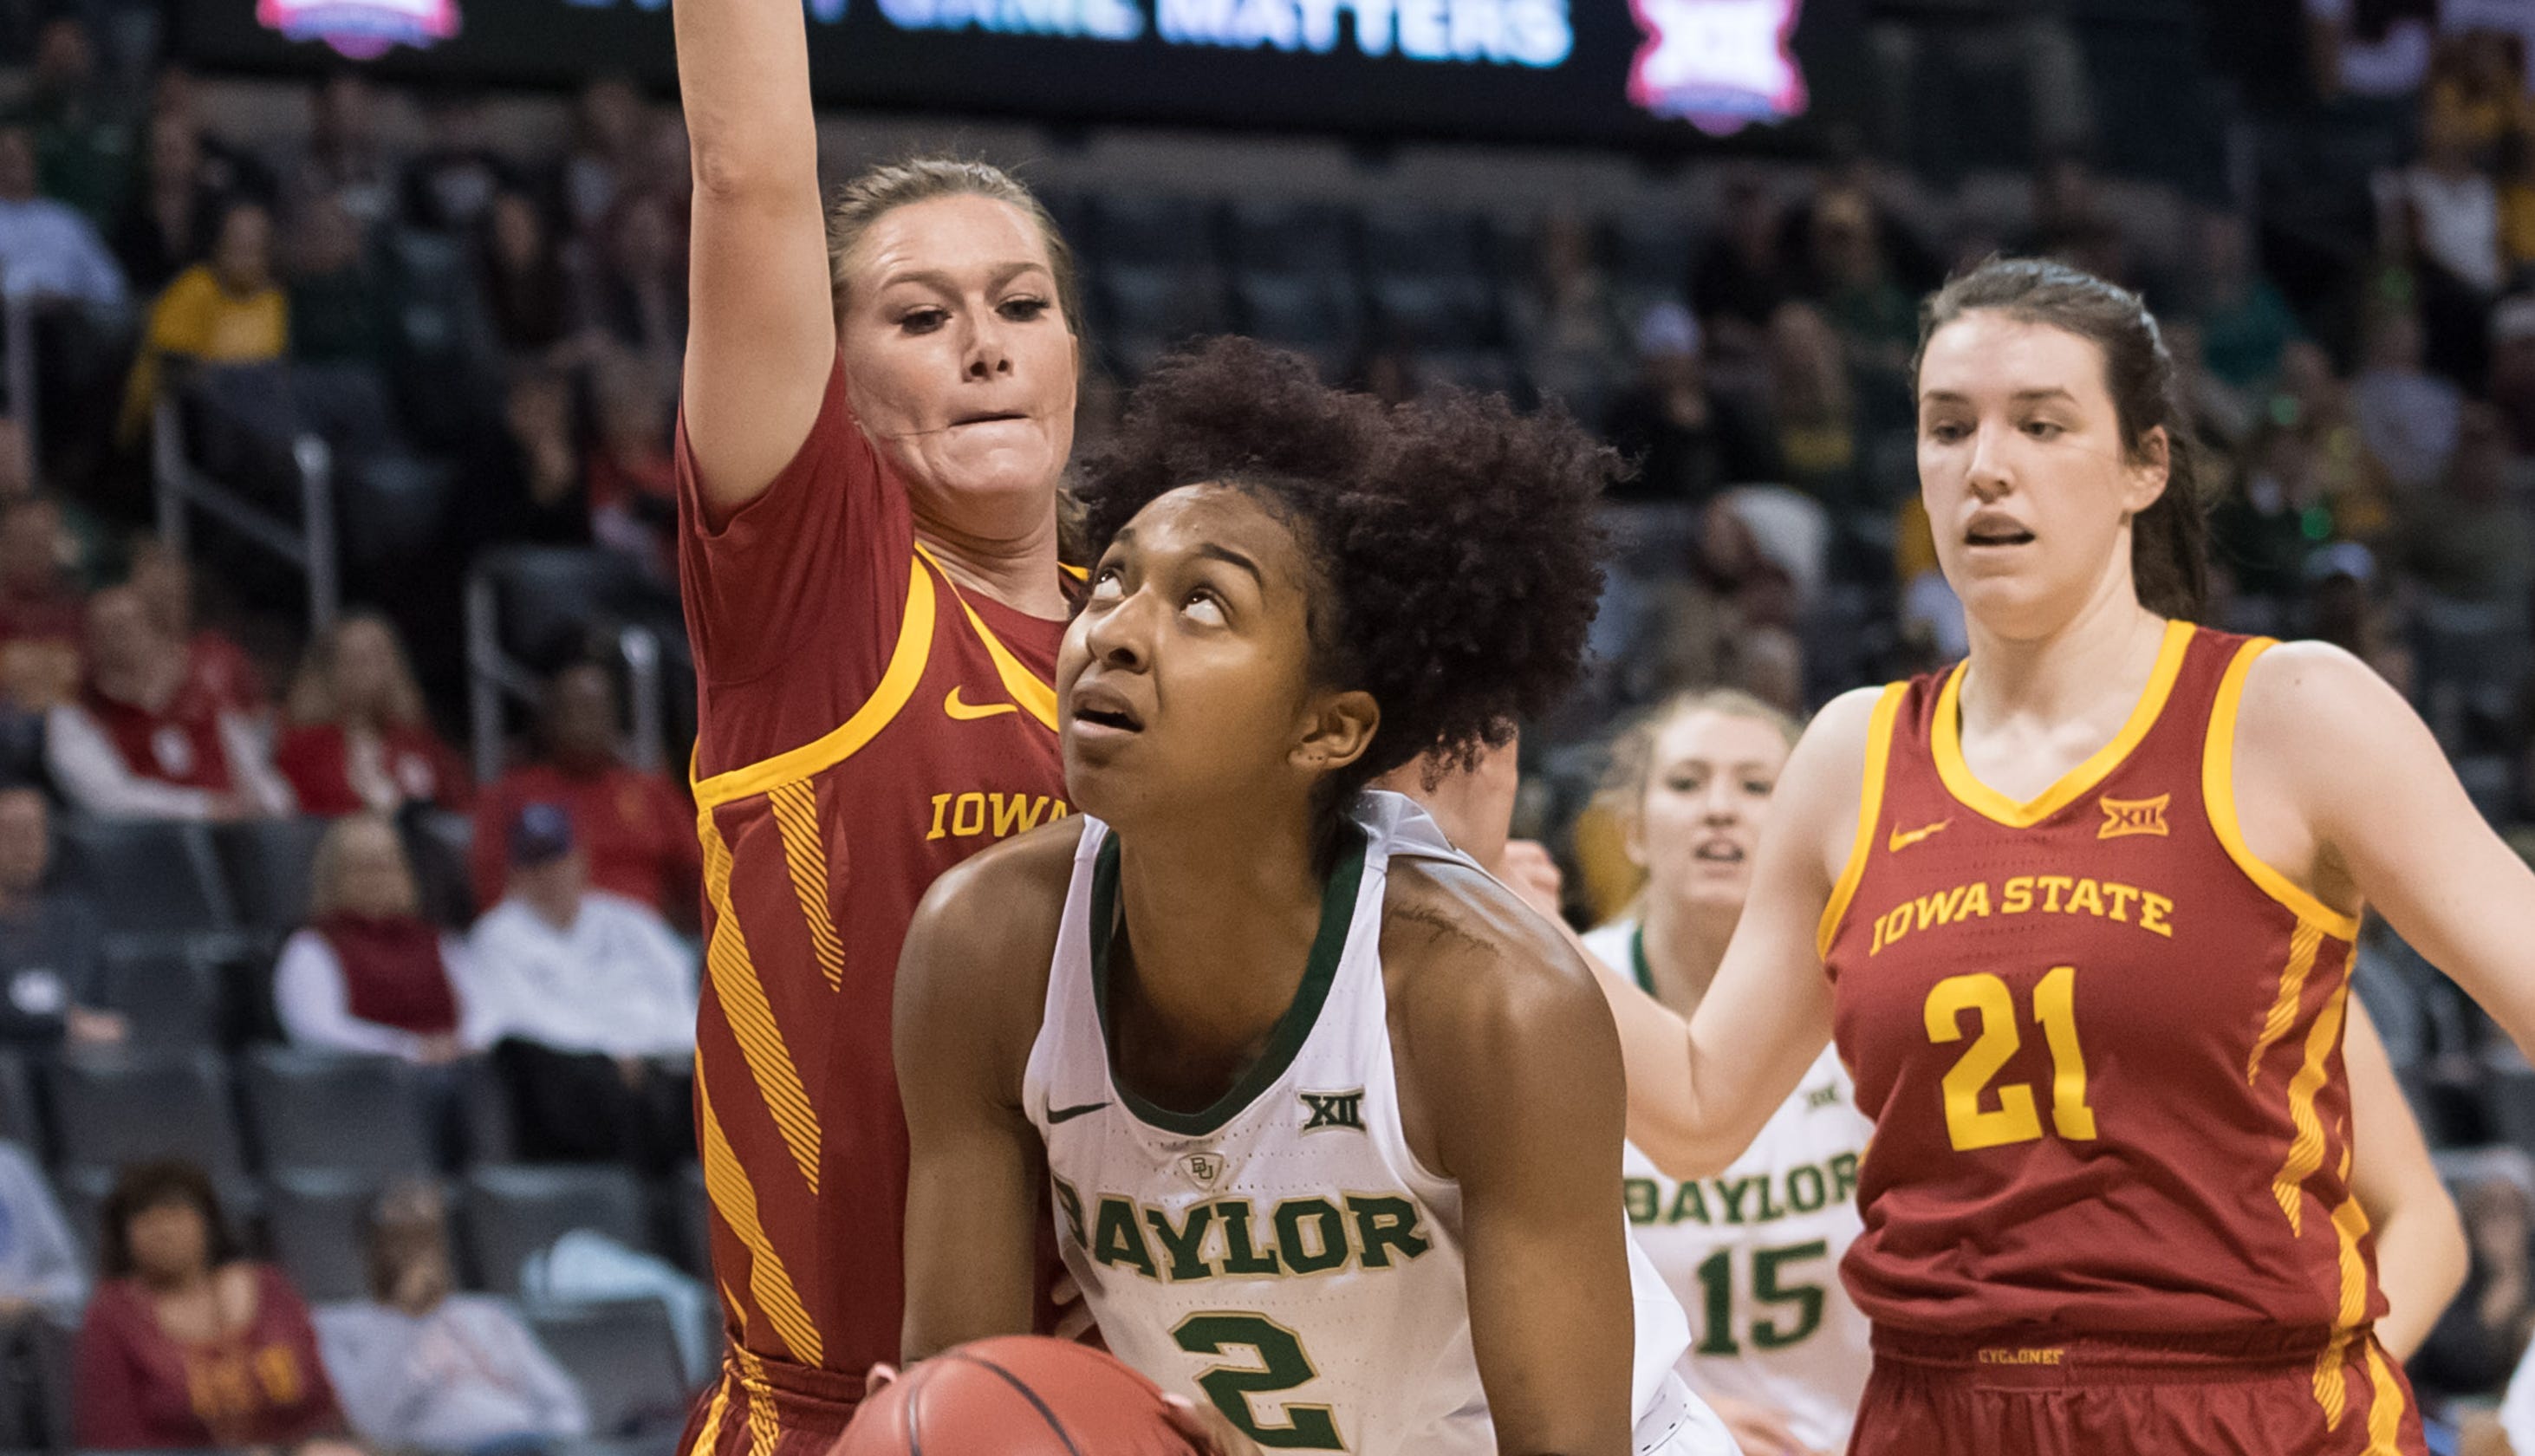 Photos: Iowa State women's basketball takes on Baylor in the Big 12 title game2925 x 1680